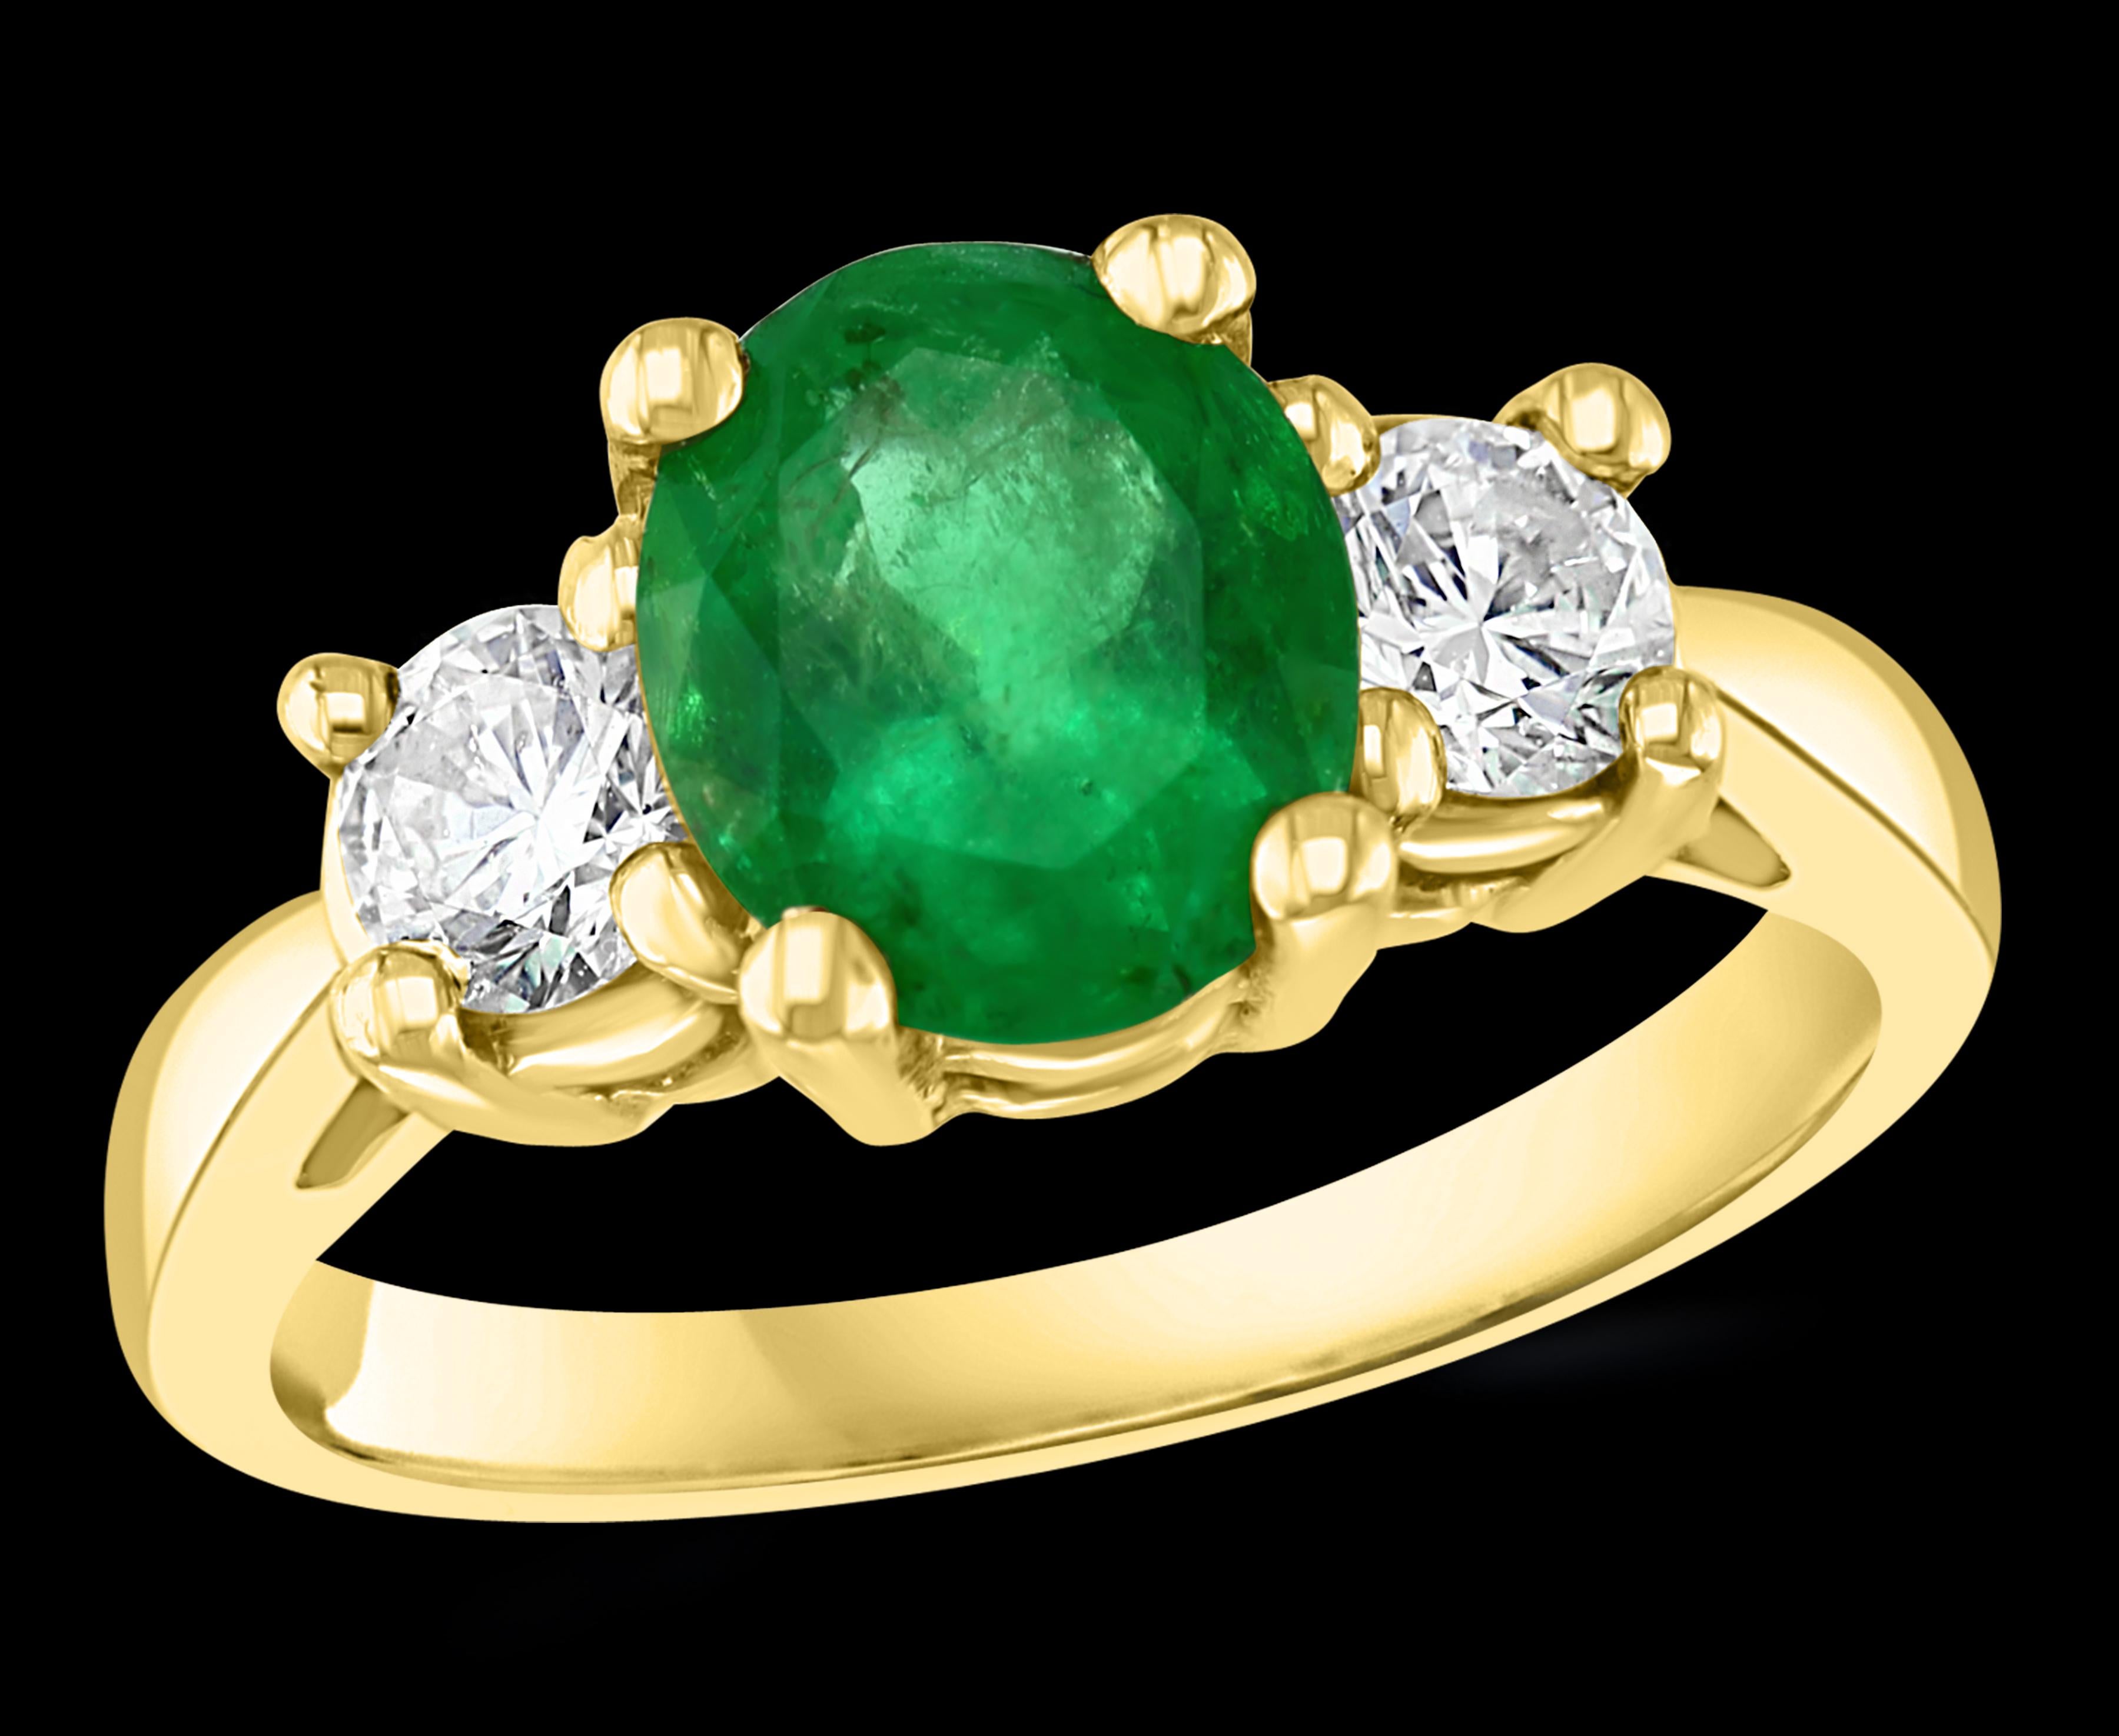 
8 X 7 Oval Cut Emerald And Diamond Ring 14 Karat Yellow Gold Size 5.5
Oval Shape Emerald Ring 
 Intense green color 
 All natural emeralds have inclusions  . 
15 pointer diamond on both side of the oval emerald 
Total diamonds 0.30 Ct
Very Nice